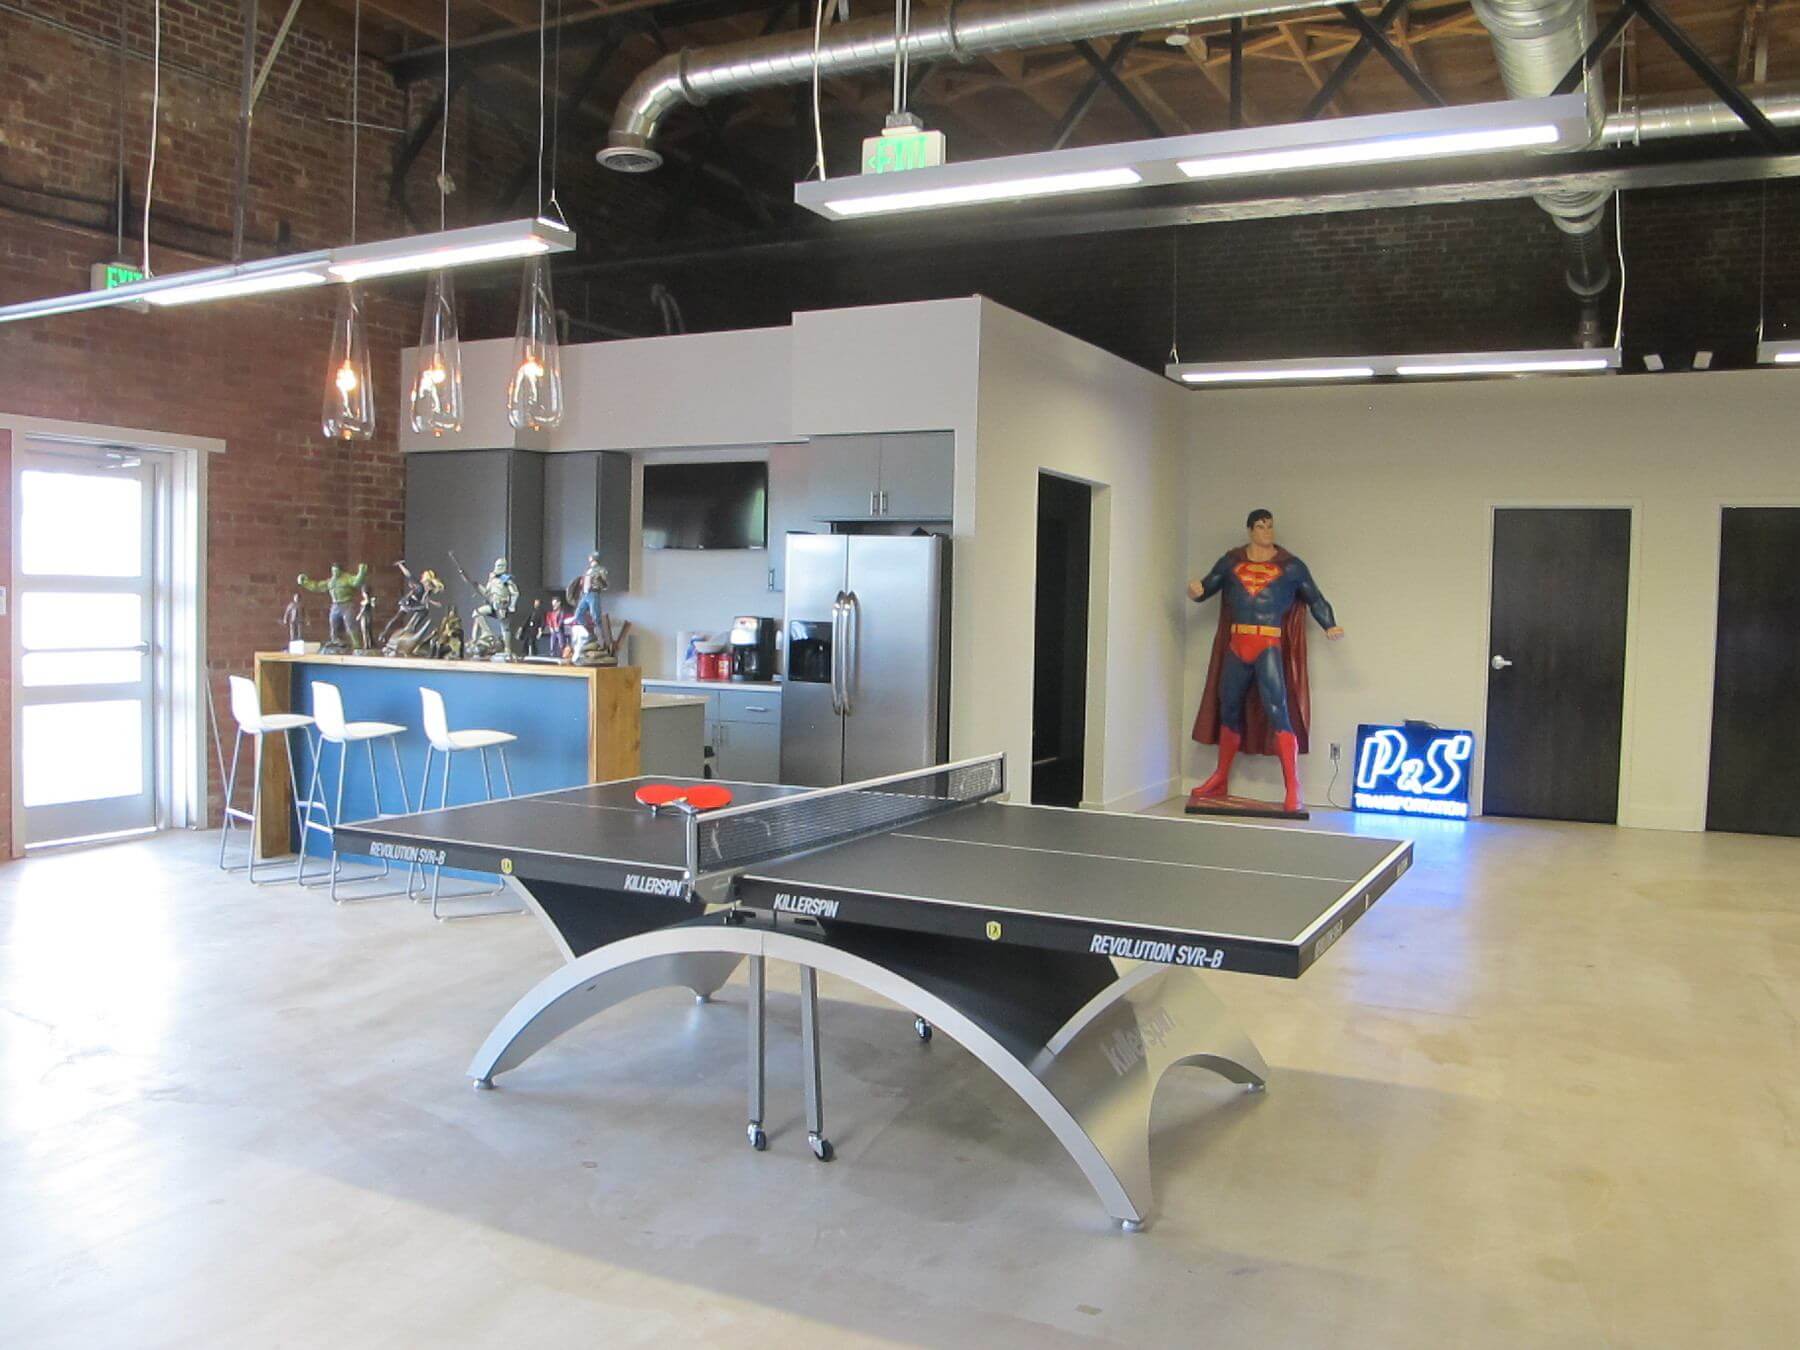 This break room boasts multiple comic heroes as well as a state-of-the-art ping-pong table for when you need to wipe your mental slate clean with a good old game of ping-pong